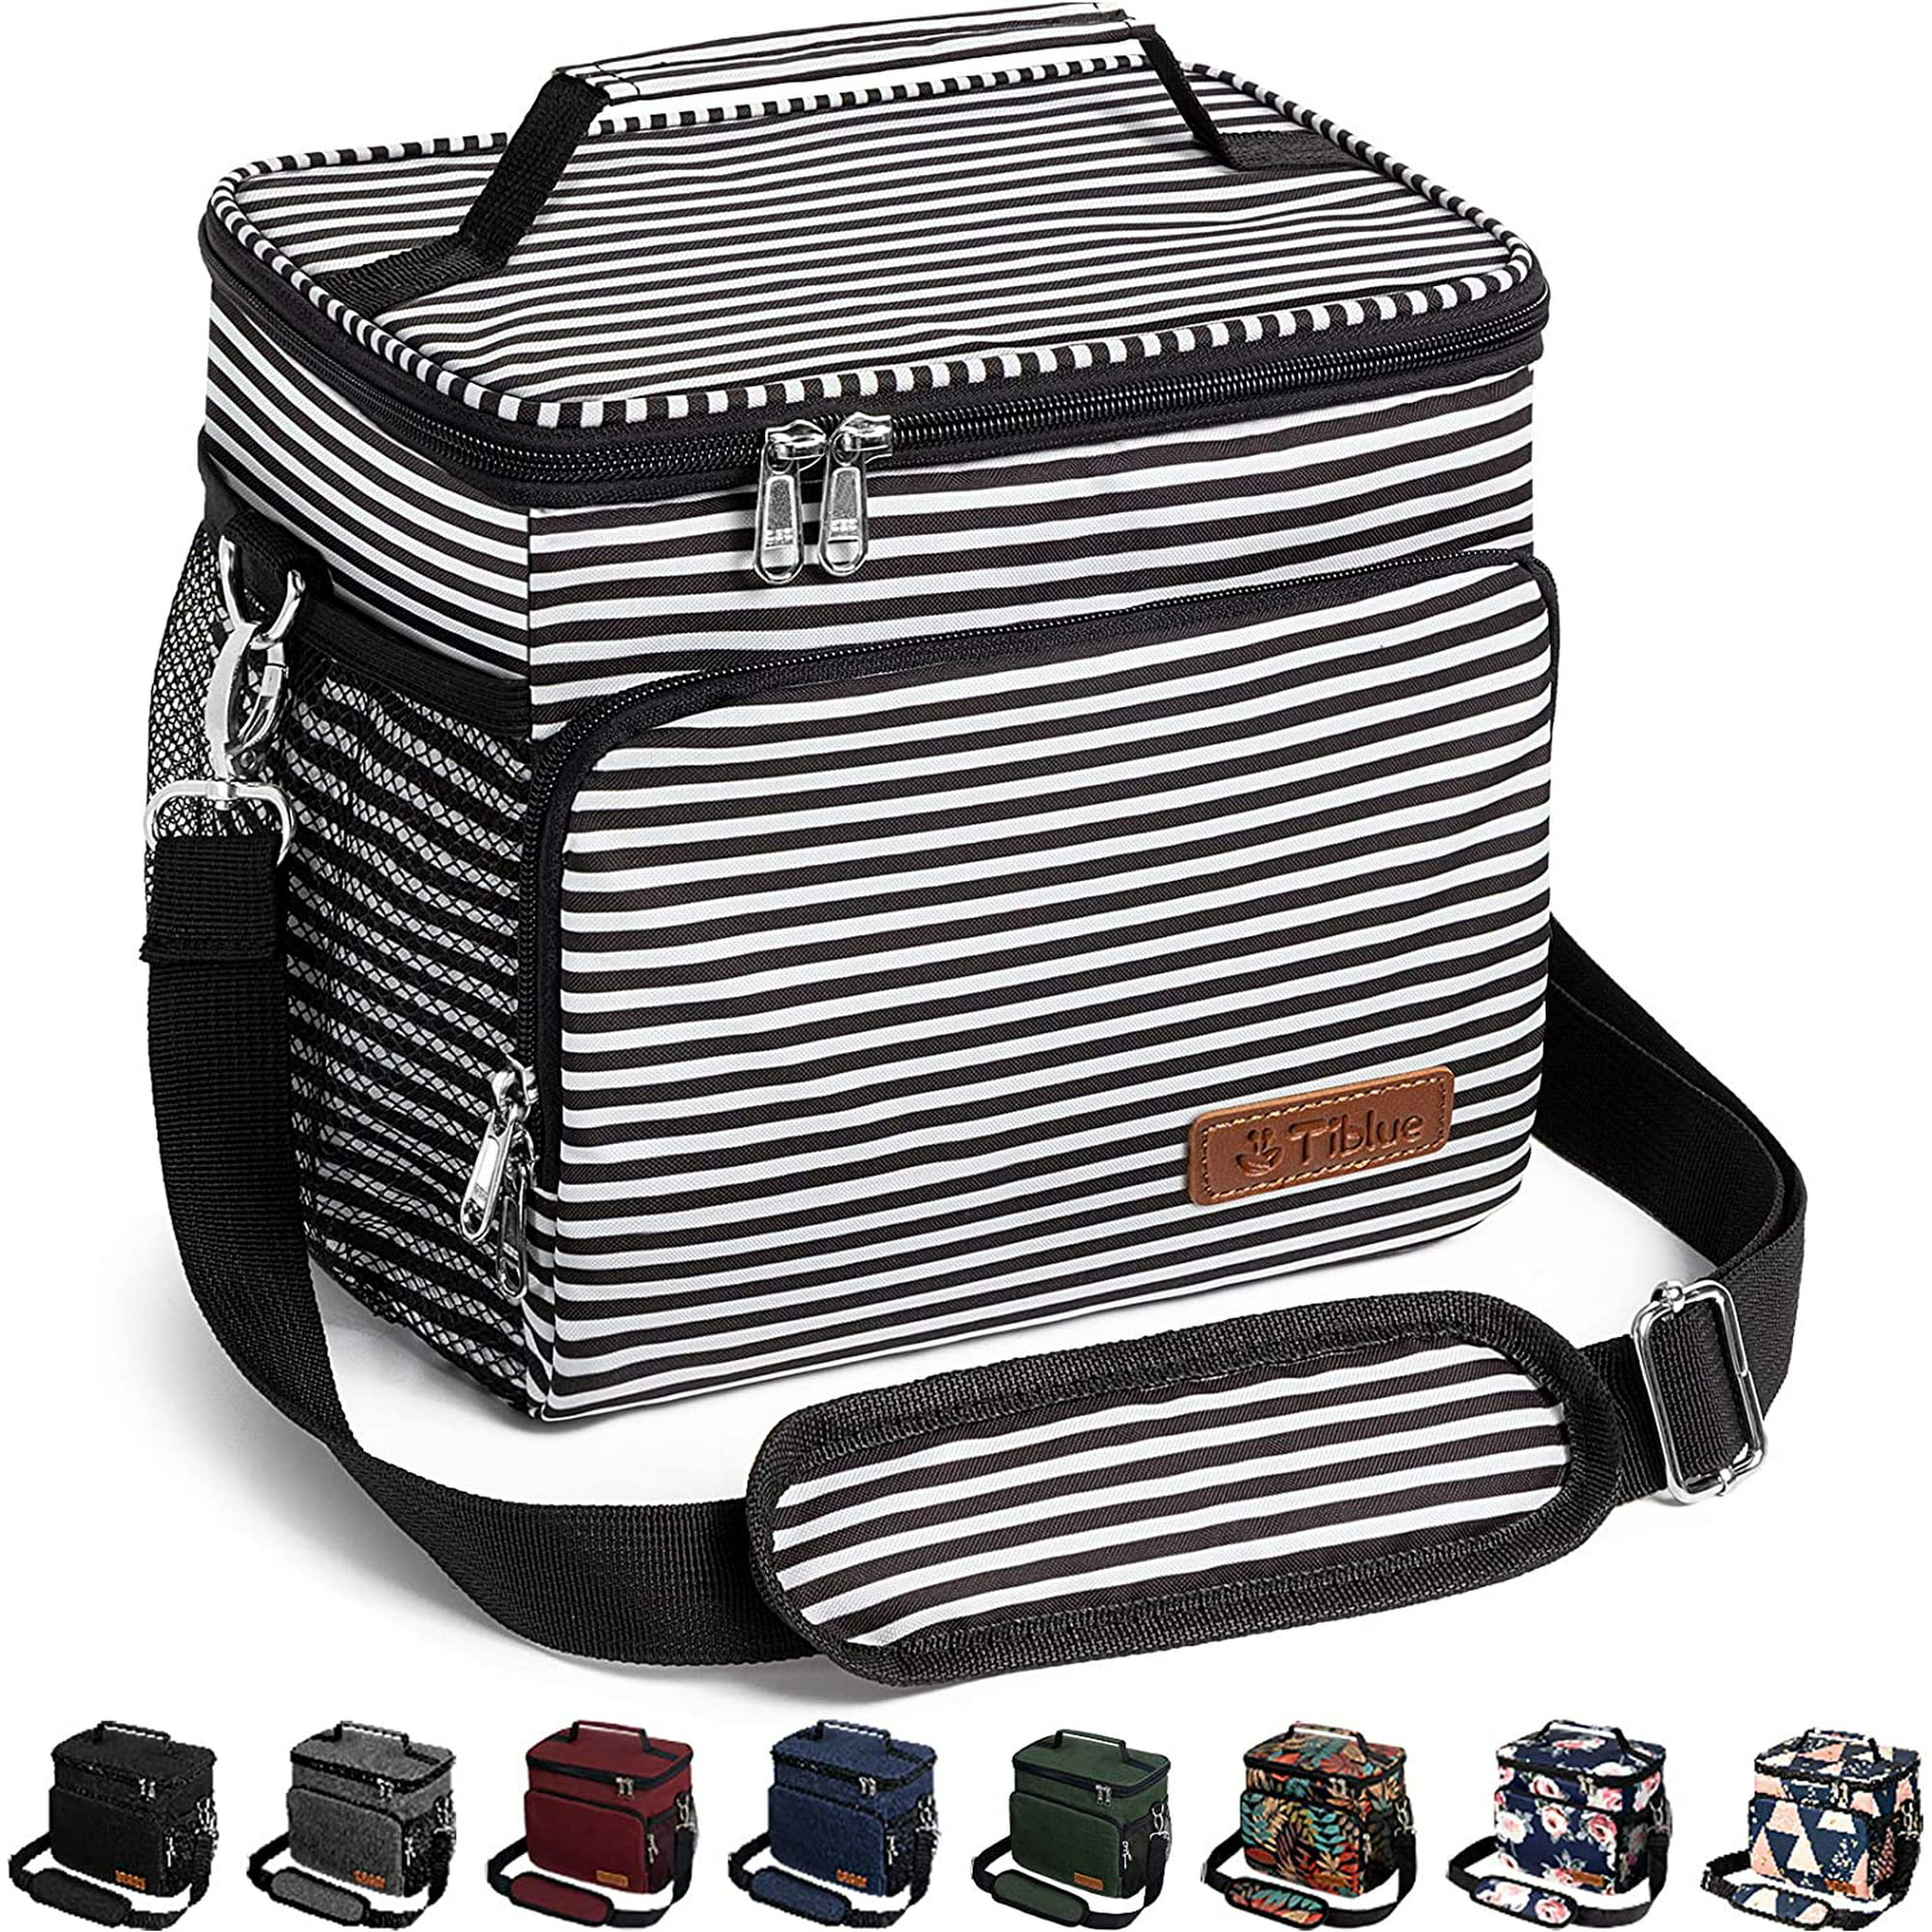 Reusable Lunch Box for Office Work Picnic Beach Leakproof Cooler Tote Bag Freezable Lunch Bag with Adjustable Shoulder Strap for Adult Insulated Lunch Bag for Women/Men